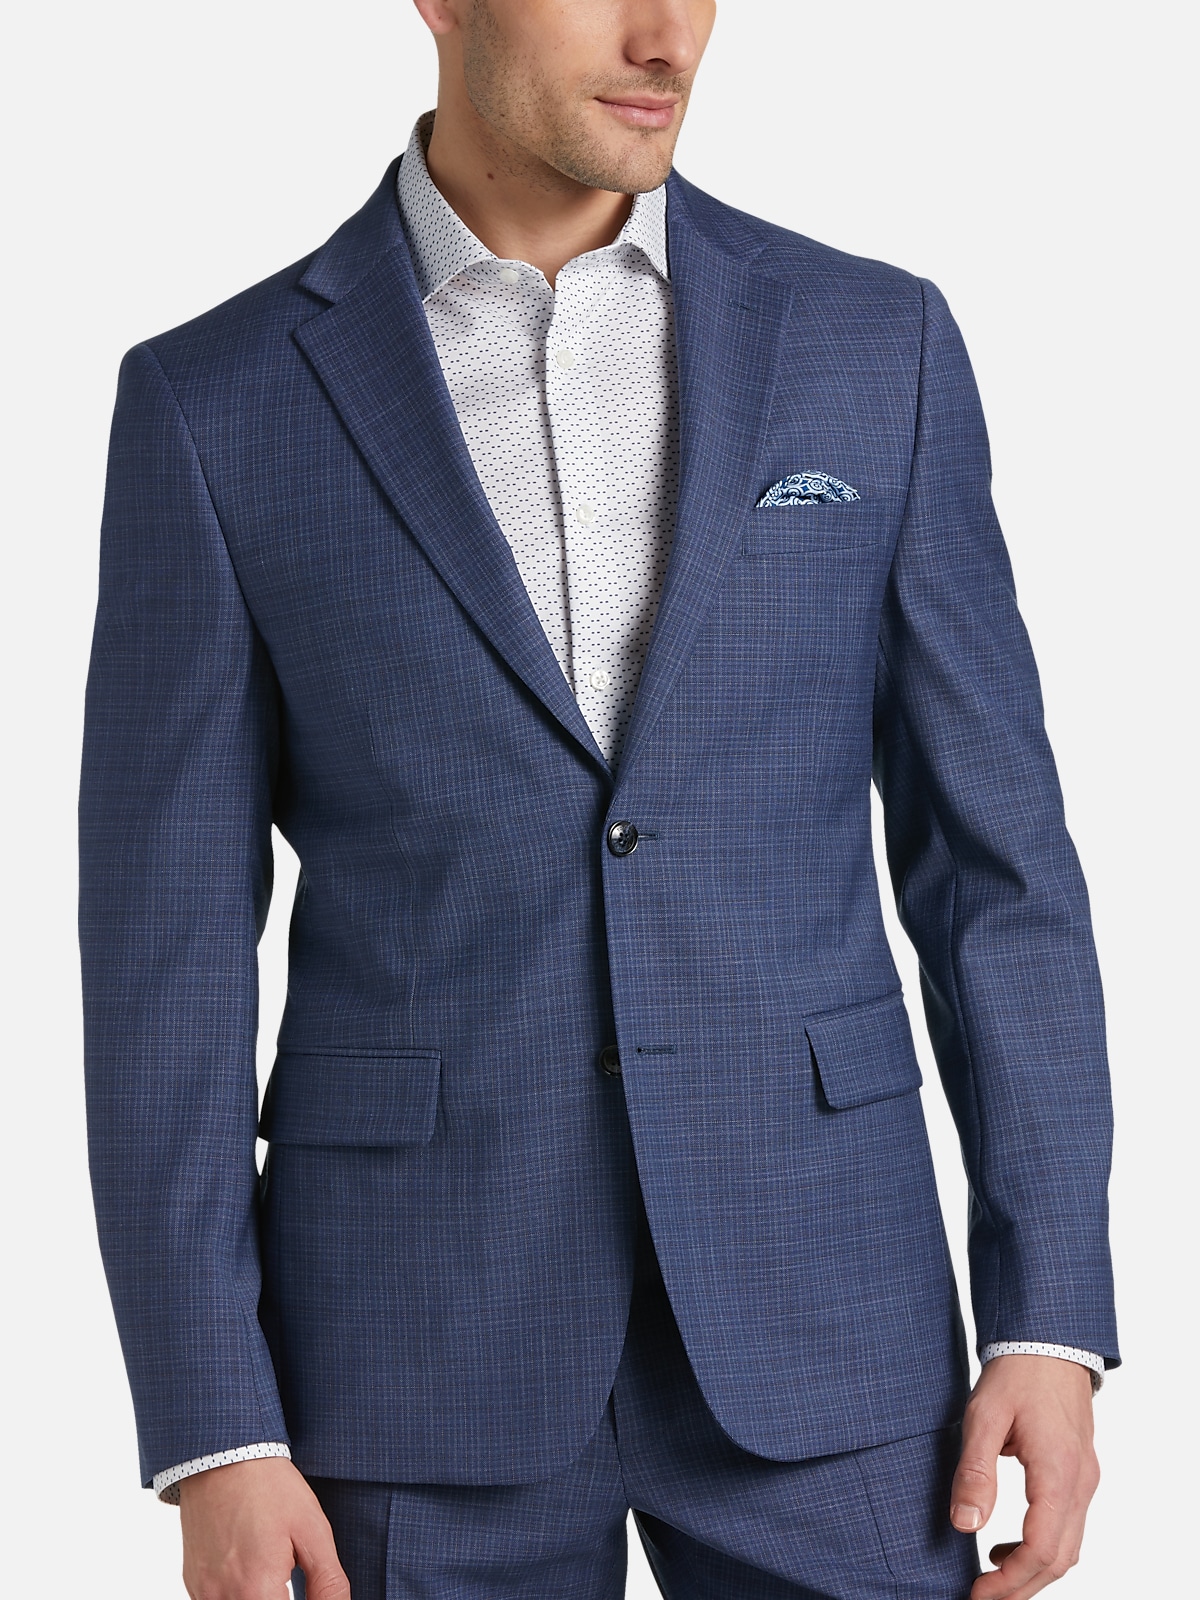 Tommy Hilfiger Modern Fit Suit Separates Jacket | All Clearance $39.99 ...